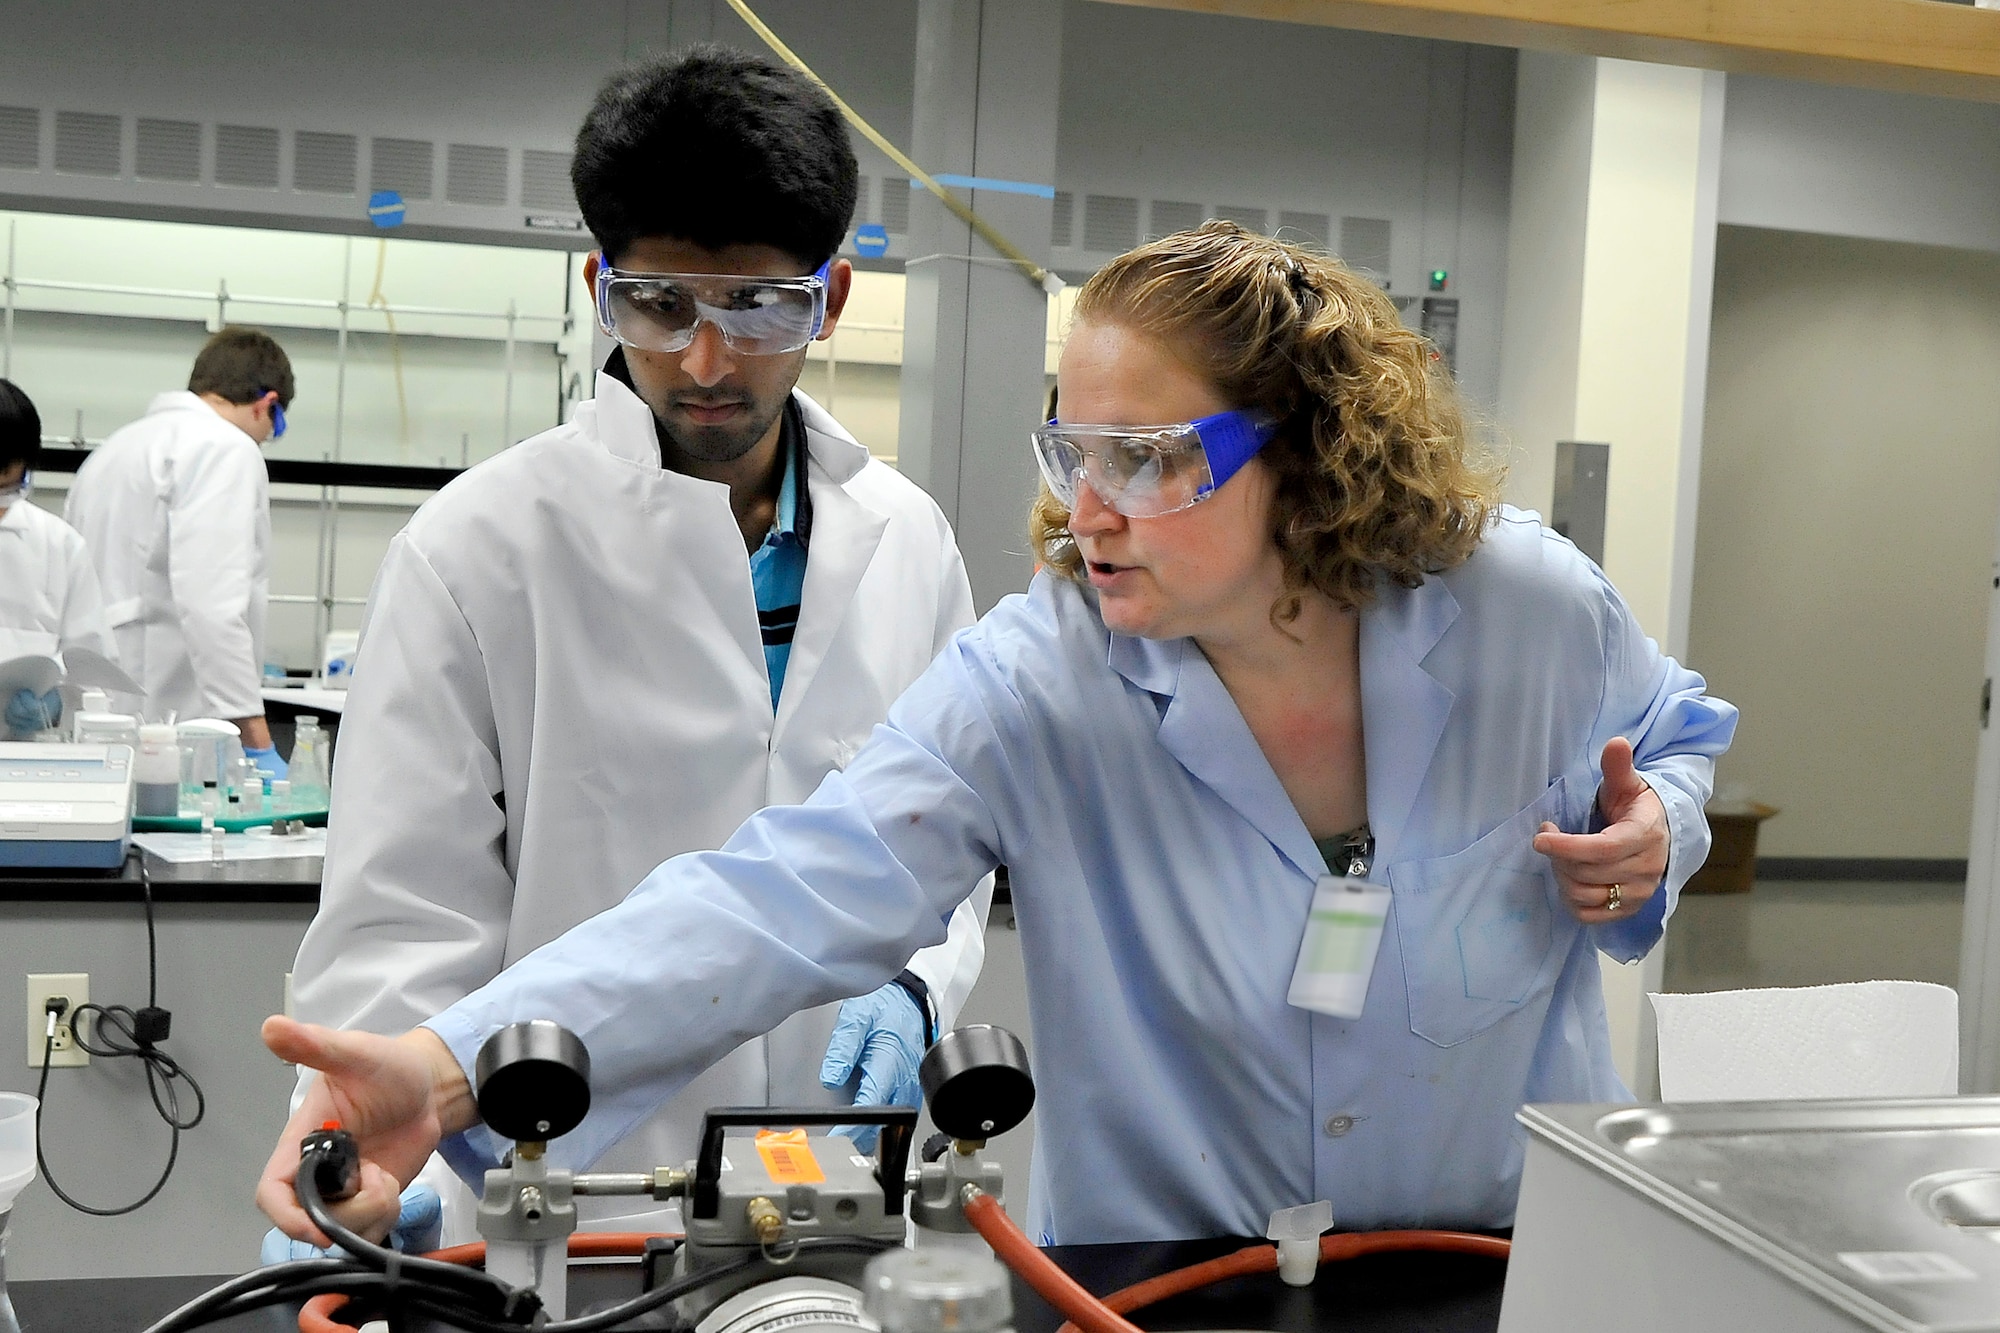 First Year Mentor Dr. Kelli Slunt works with New York native Tayyab Shah, 17, in the lab during the U.S. National Chemistry Olympiad Study Camp at the U.S. Air Force Academy. This camp has been held at the Academy  every year since 1983 and it prepares students for the International Chemistry Olympiad. (U.S. Air Force Photo/Megan Davis)